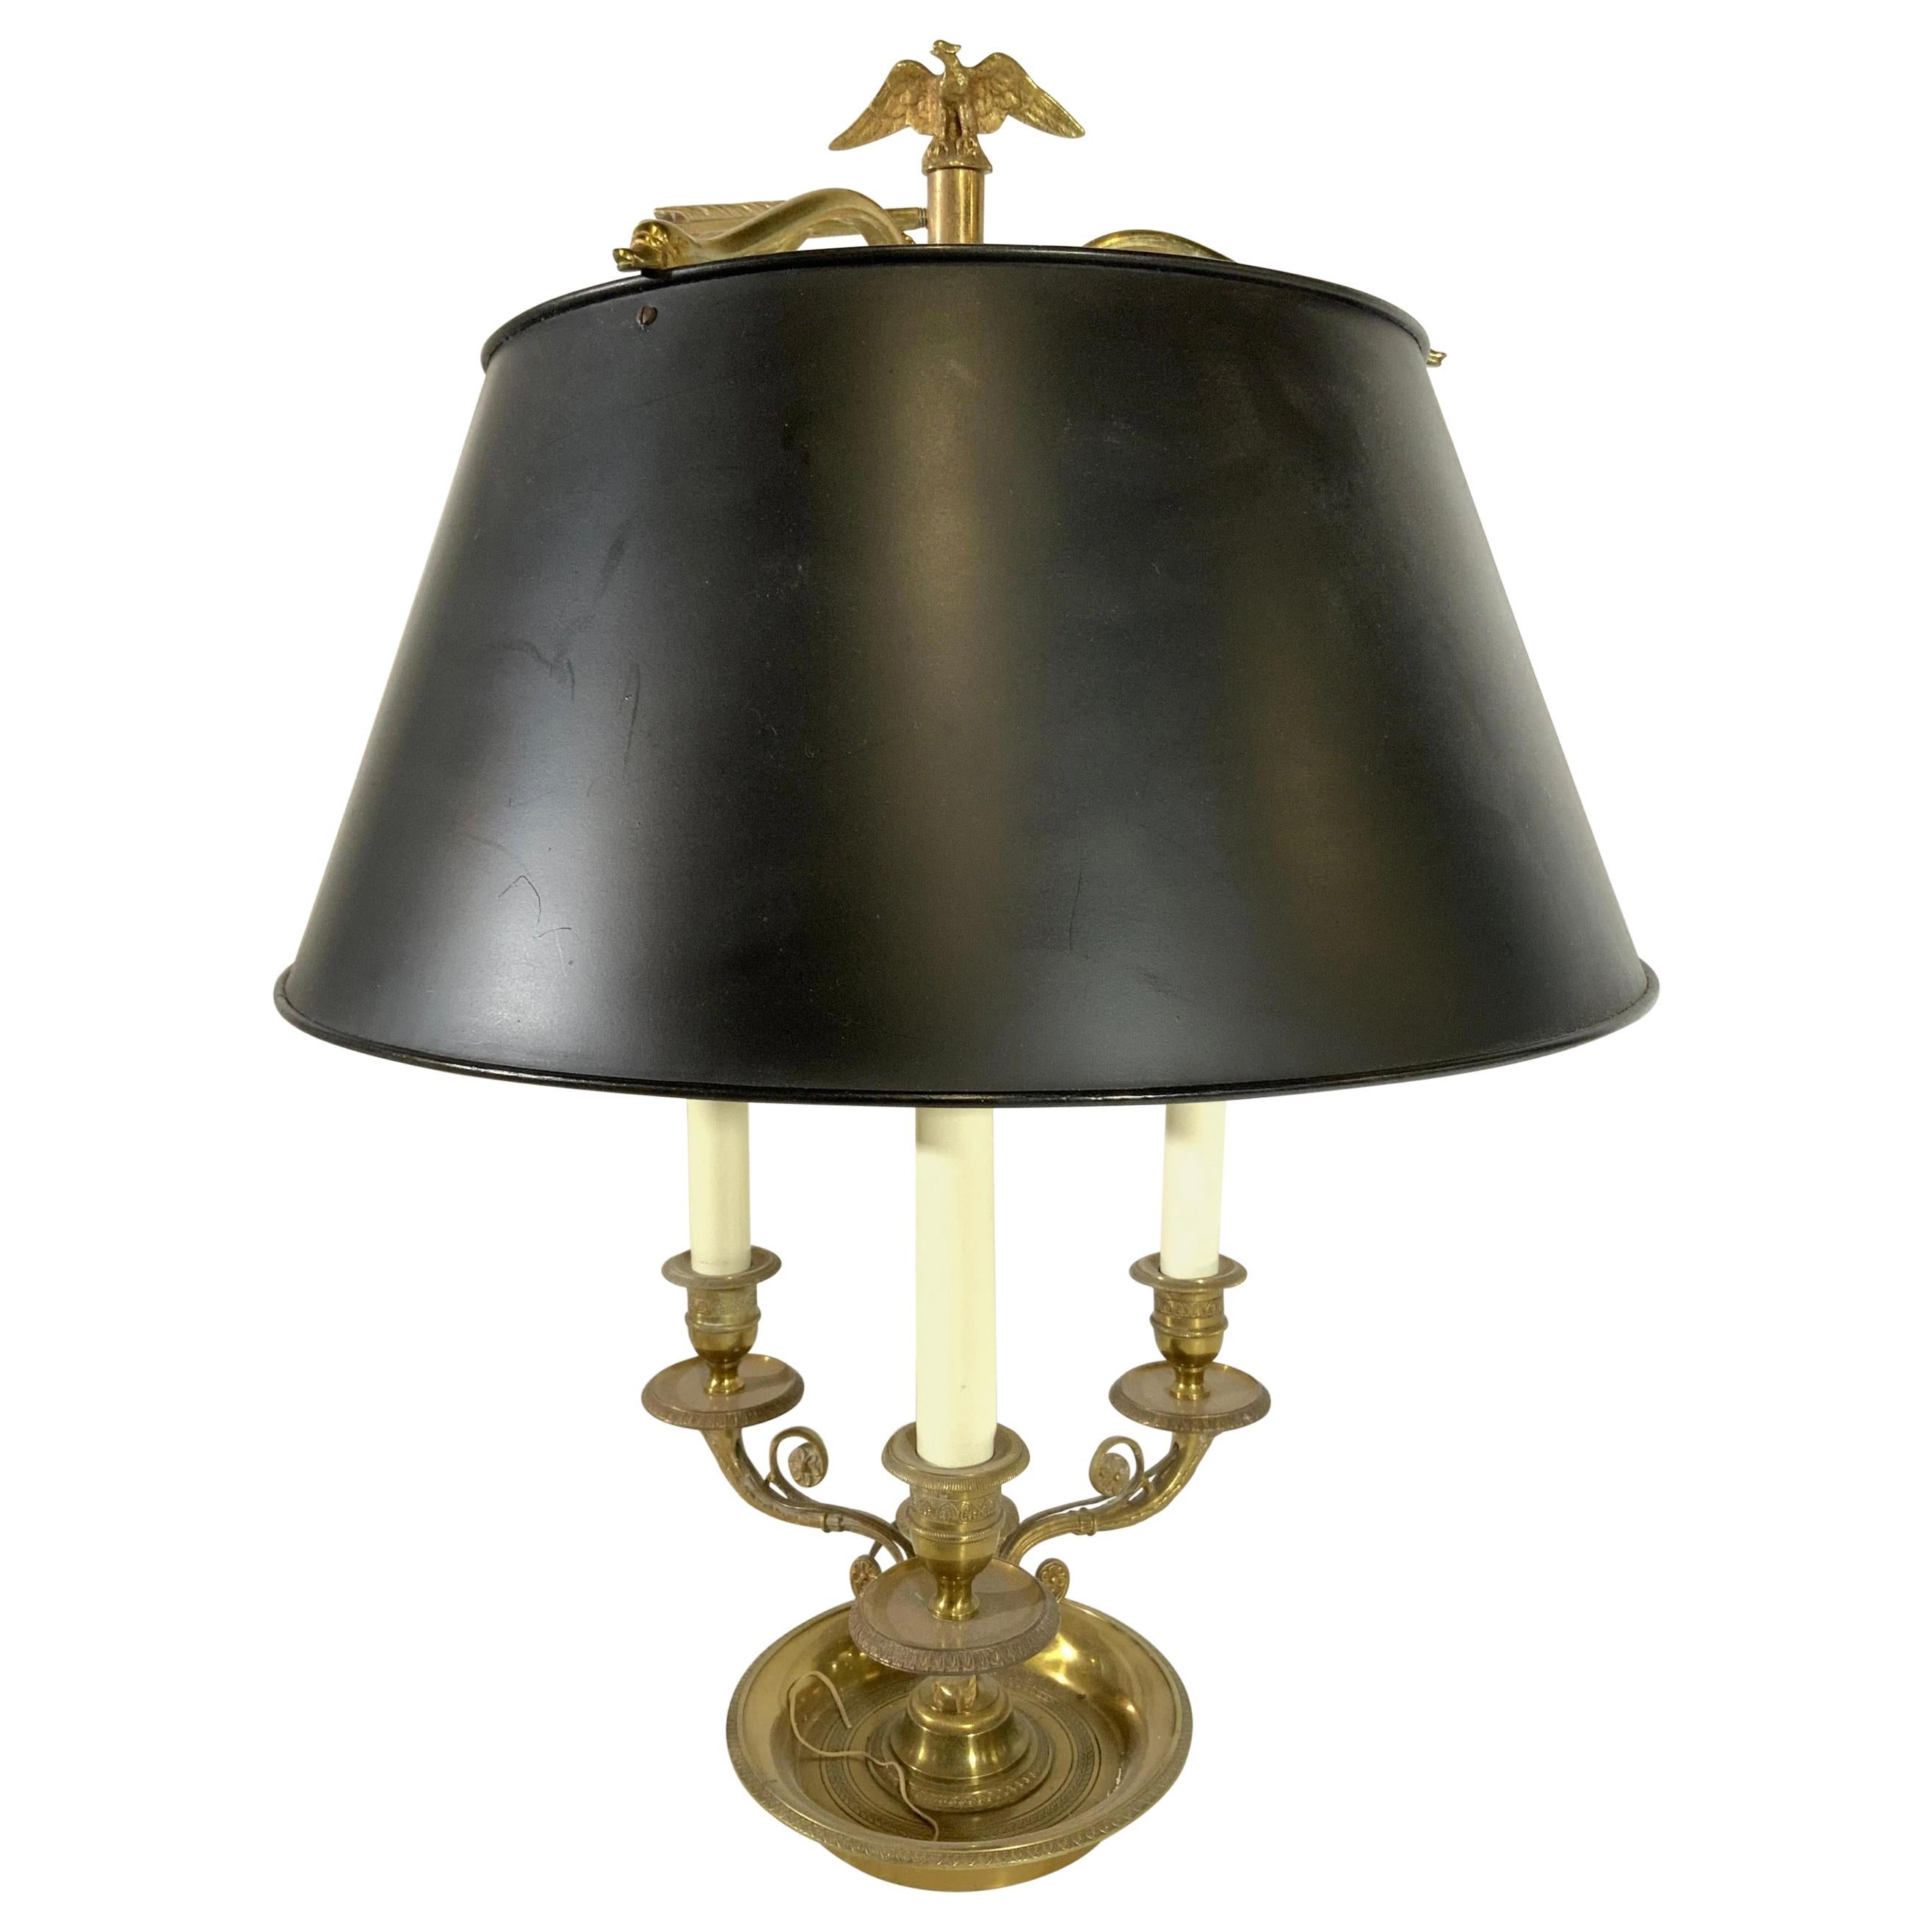 Vintage French Empire Bouillotte Lamp Shade Brass Metal Tole 13” More Avaialble 